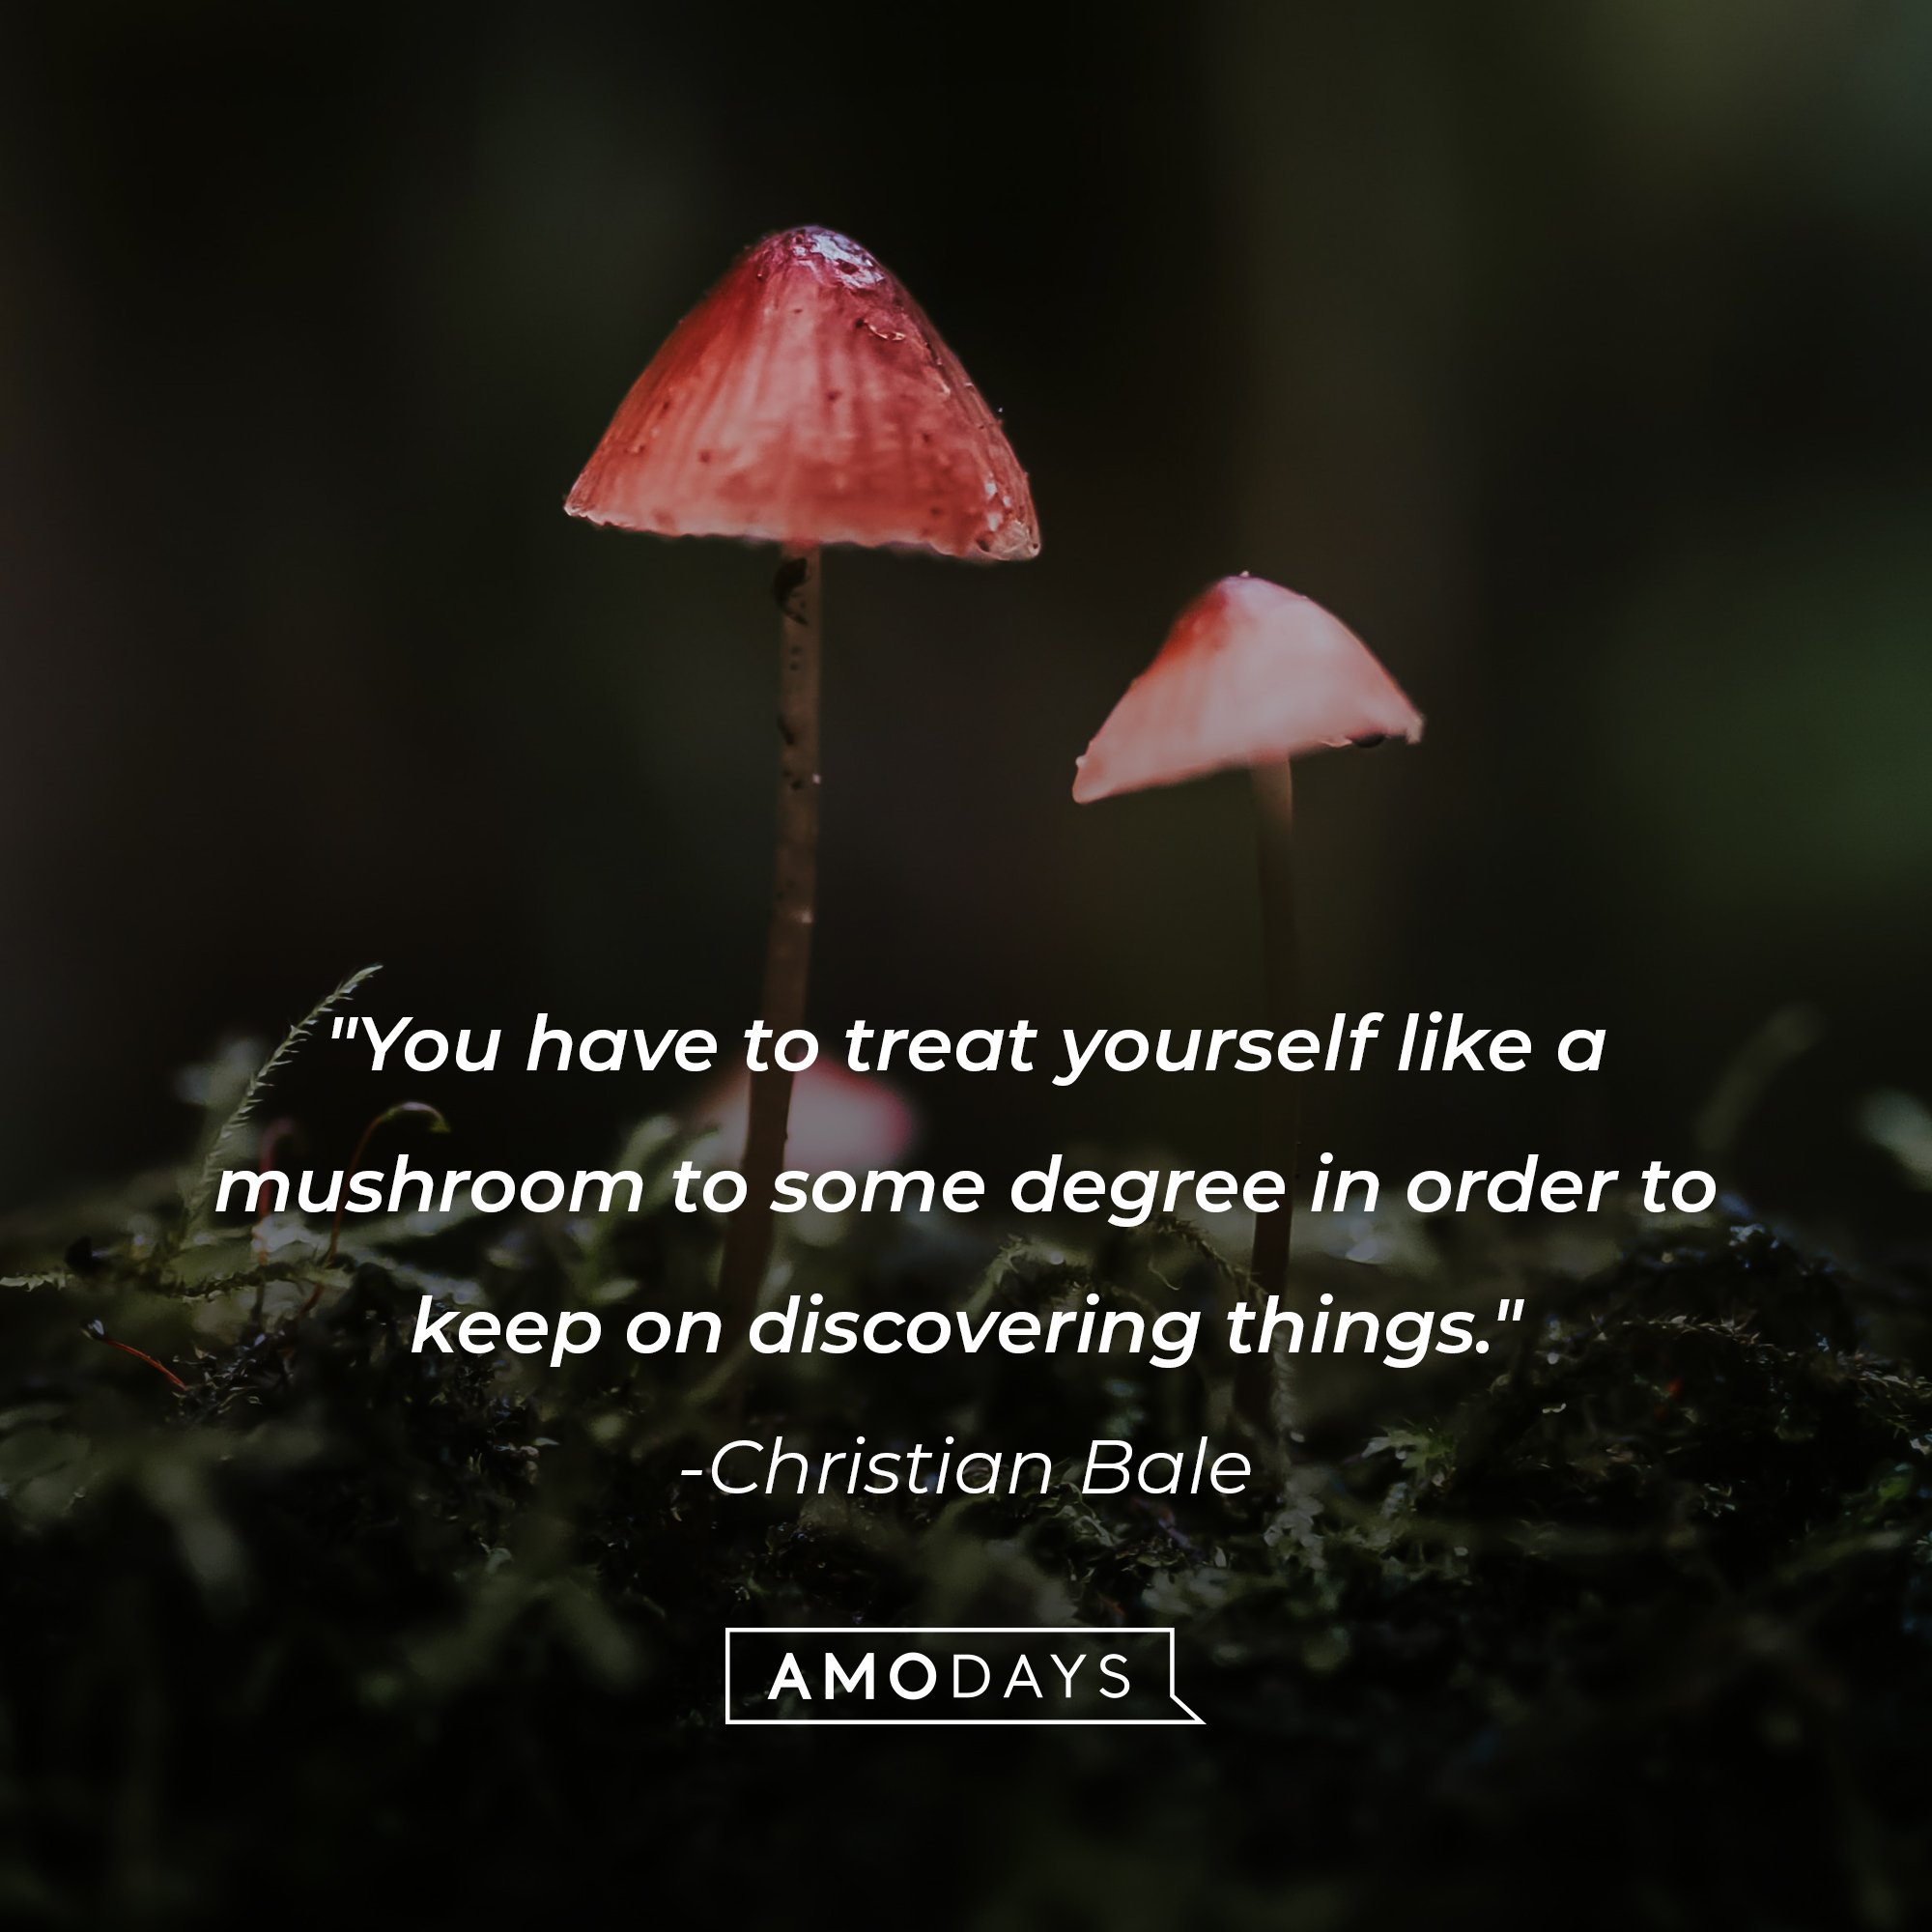 Christian Bale’s quote: "You have to treat yourself like a mushroom to some degree in order to keep on discovering things." | Image: AmoDays